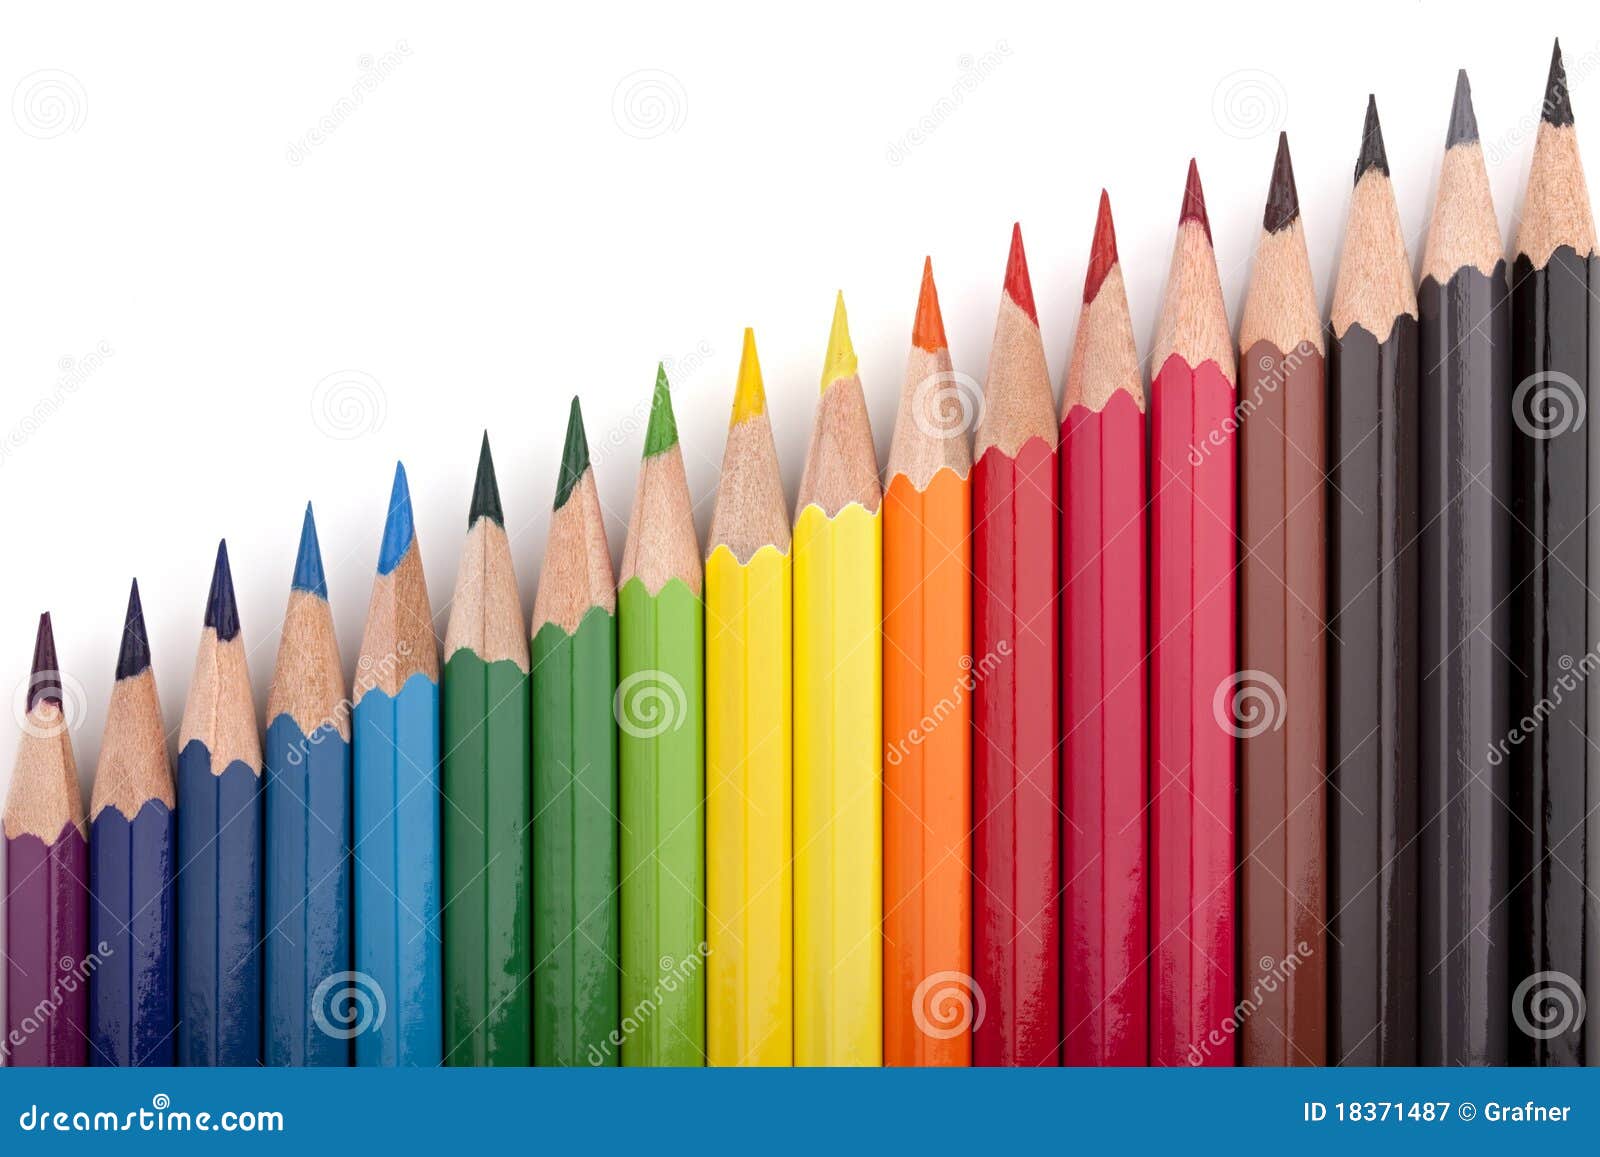 4+ Thousand Crayons Pack Royalty-Free Images, Stock Photos & Pictures